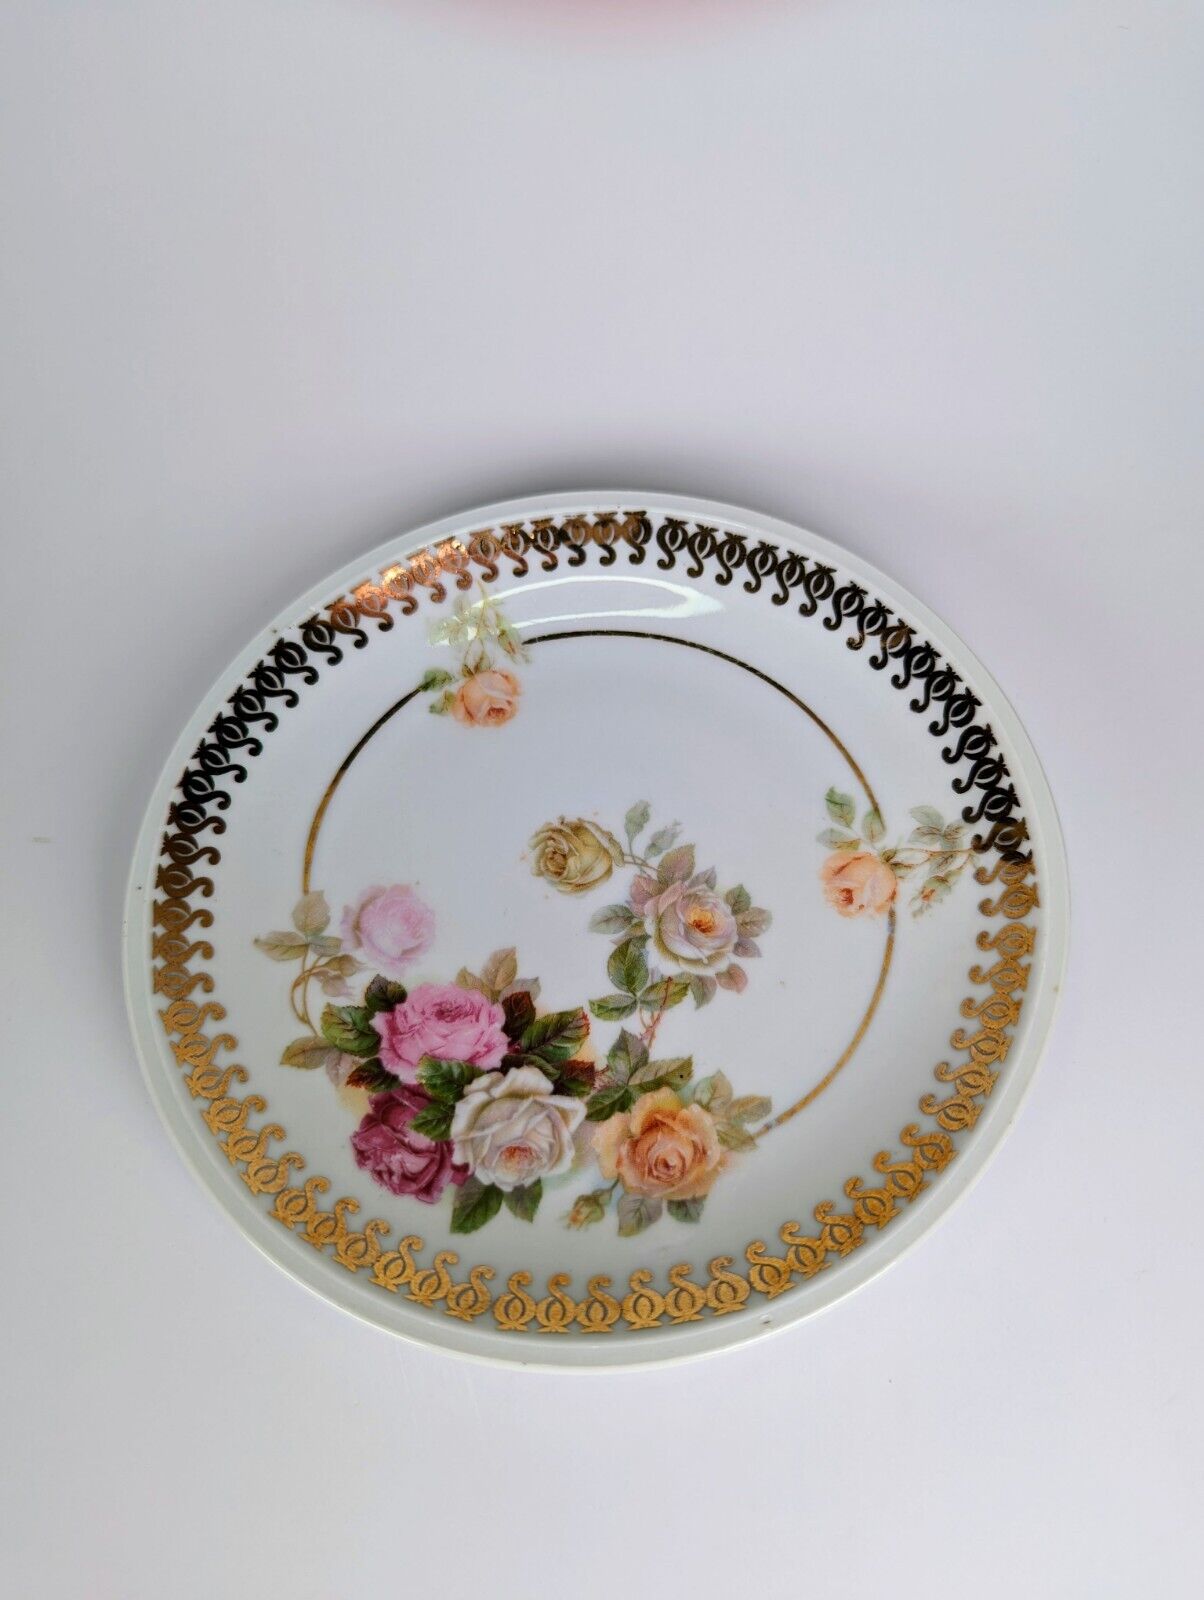 Antique Hand Painted Porcelain Plate Germany Roses Art Nouveau 6 Inch Roses